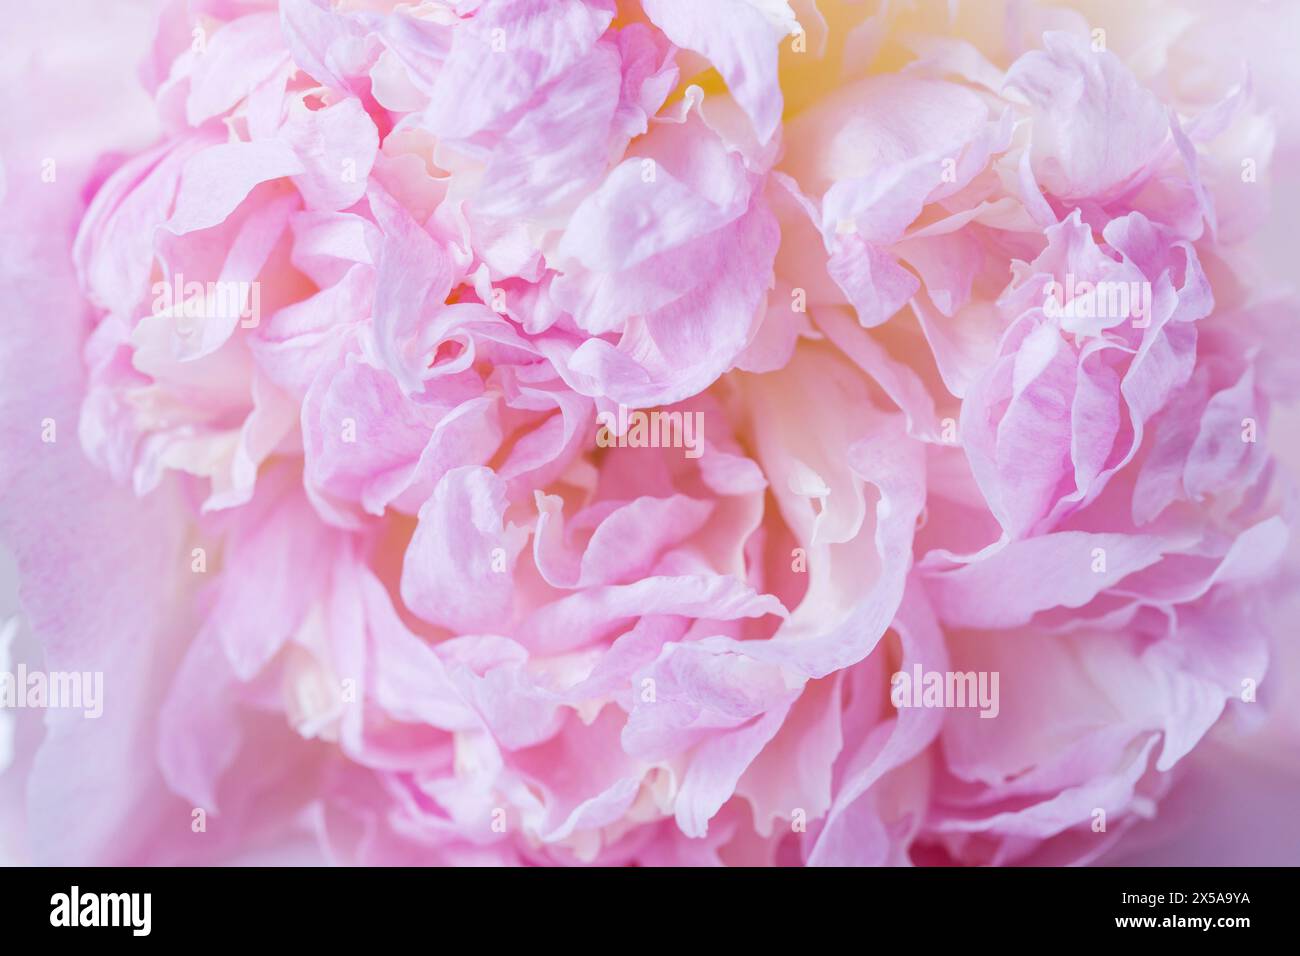 Beautiful aromatic fresh blossoming tender pink peonies texture, close up view. Romantic wedding background Stock Photo